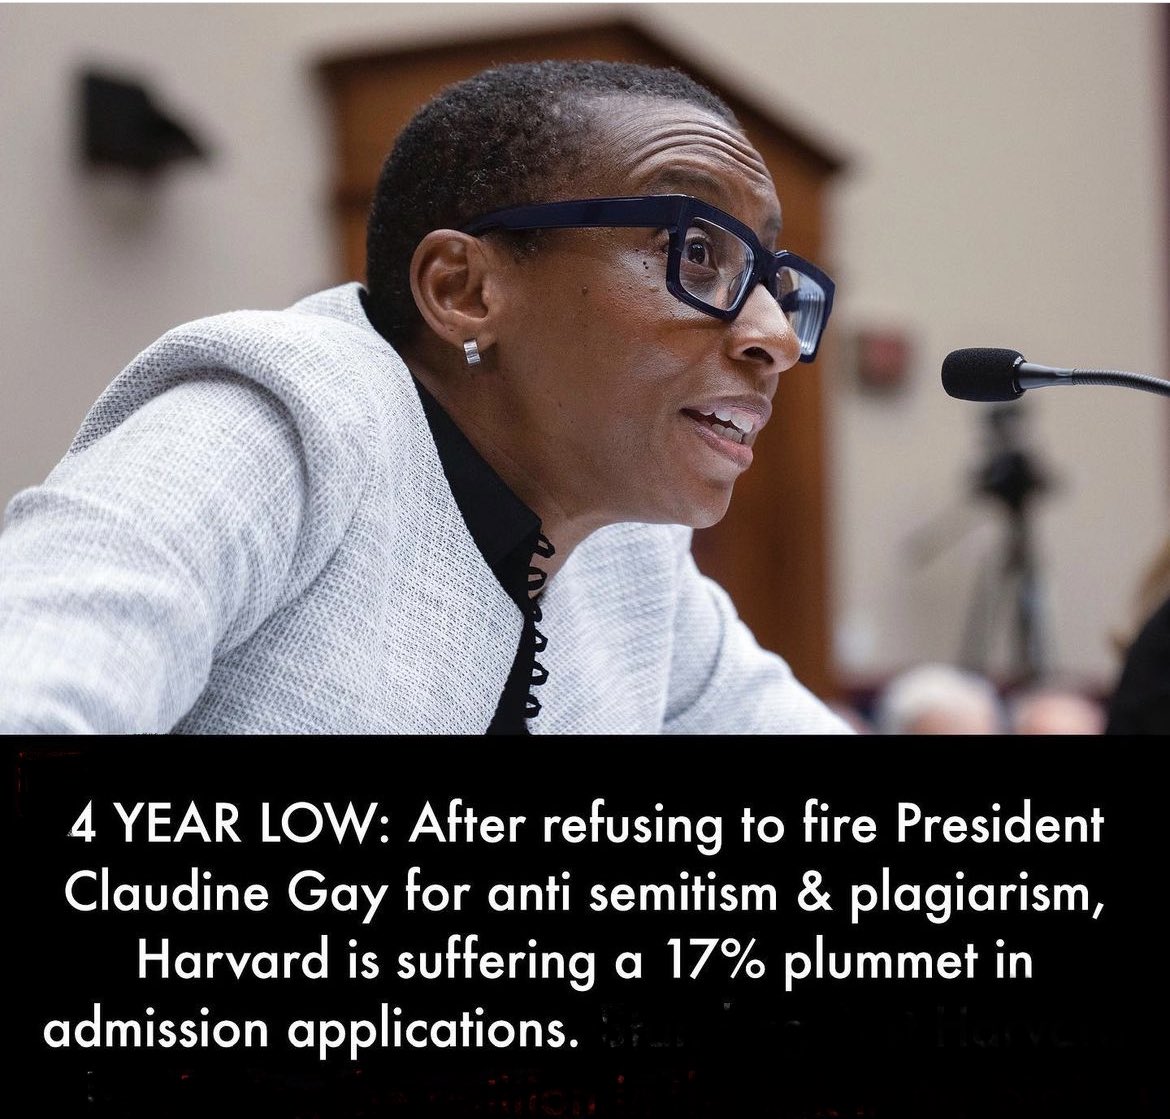 17% plummet in admissions! I think that’s awesome!! Keep your President! Good luck with that…. 😂😂